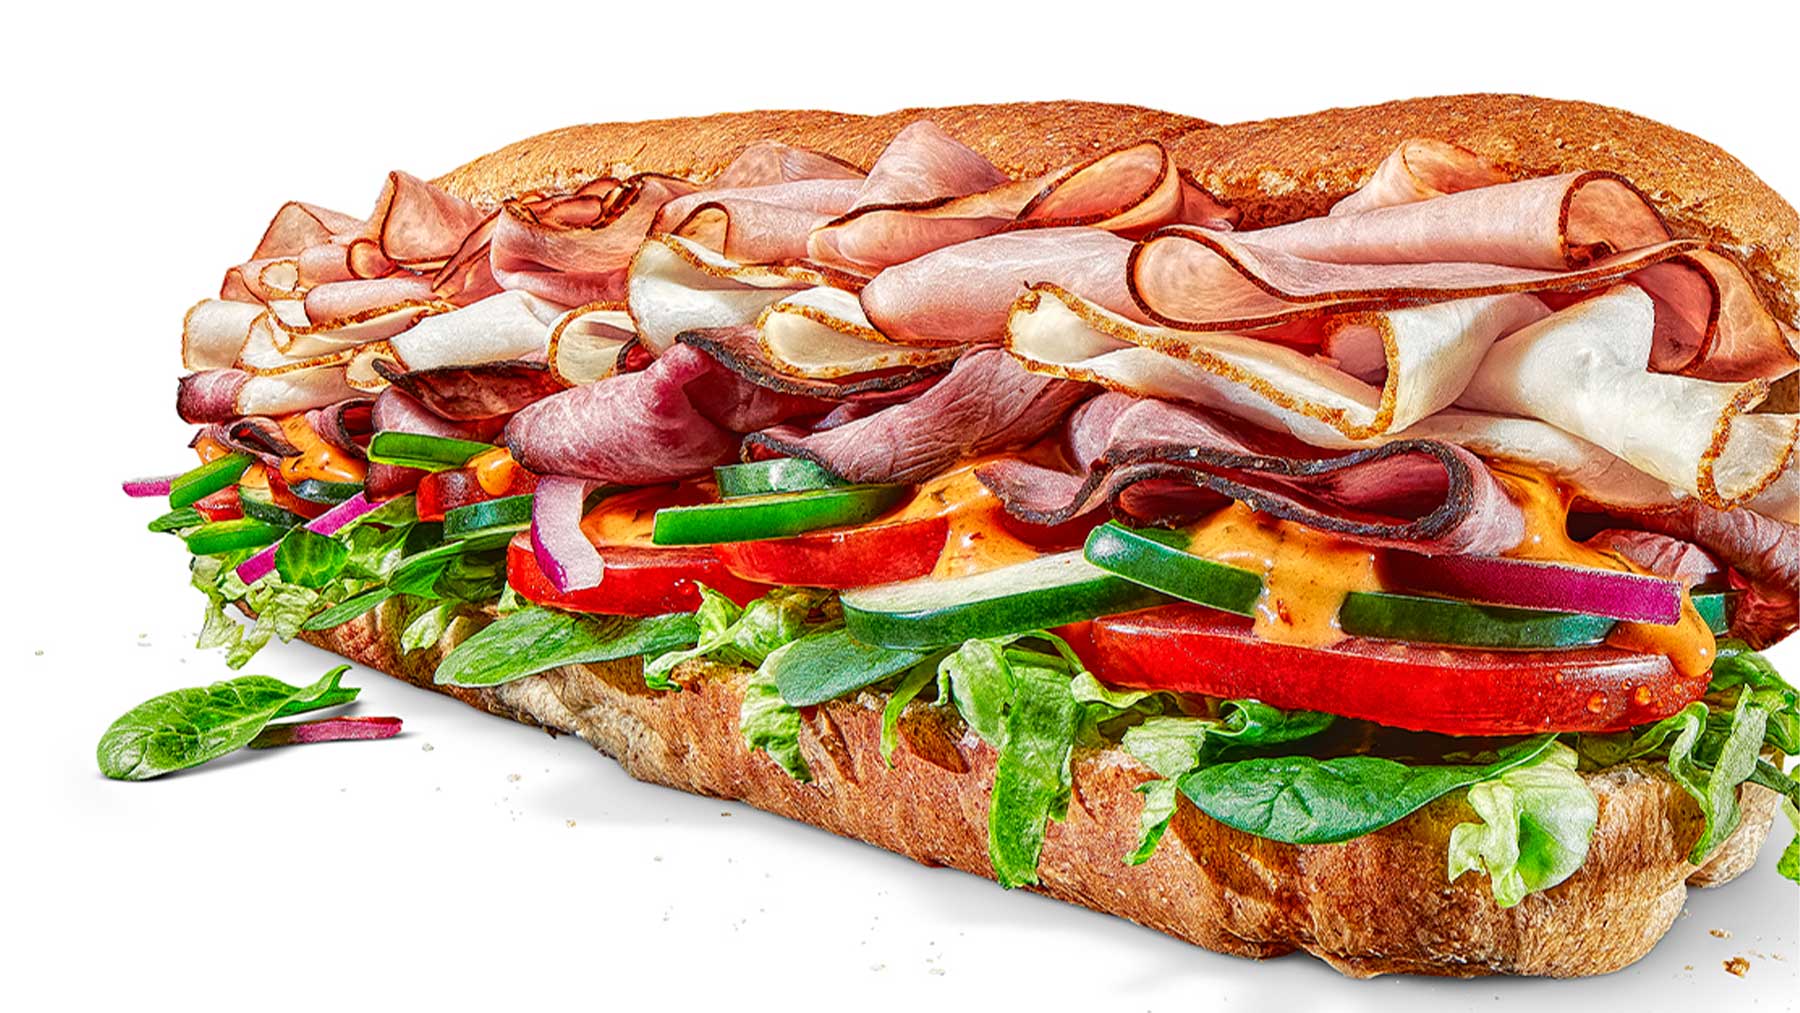 Subway Offering Free Sandwiches for Life to First Person Who Gets FootLong  Tattoo